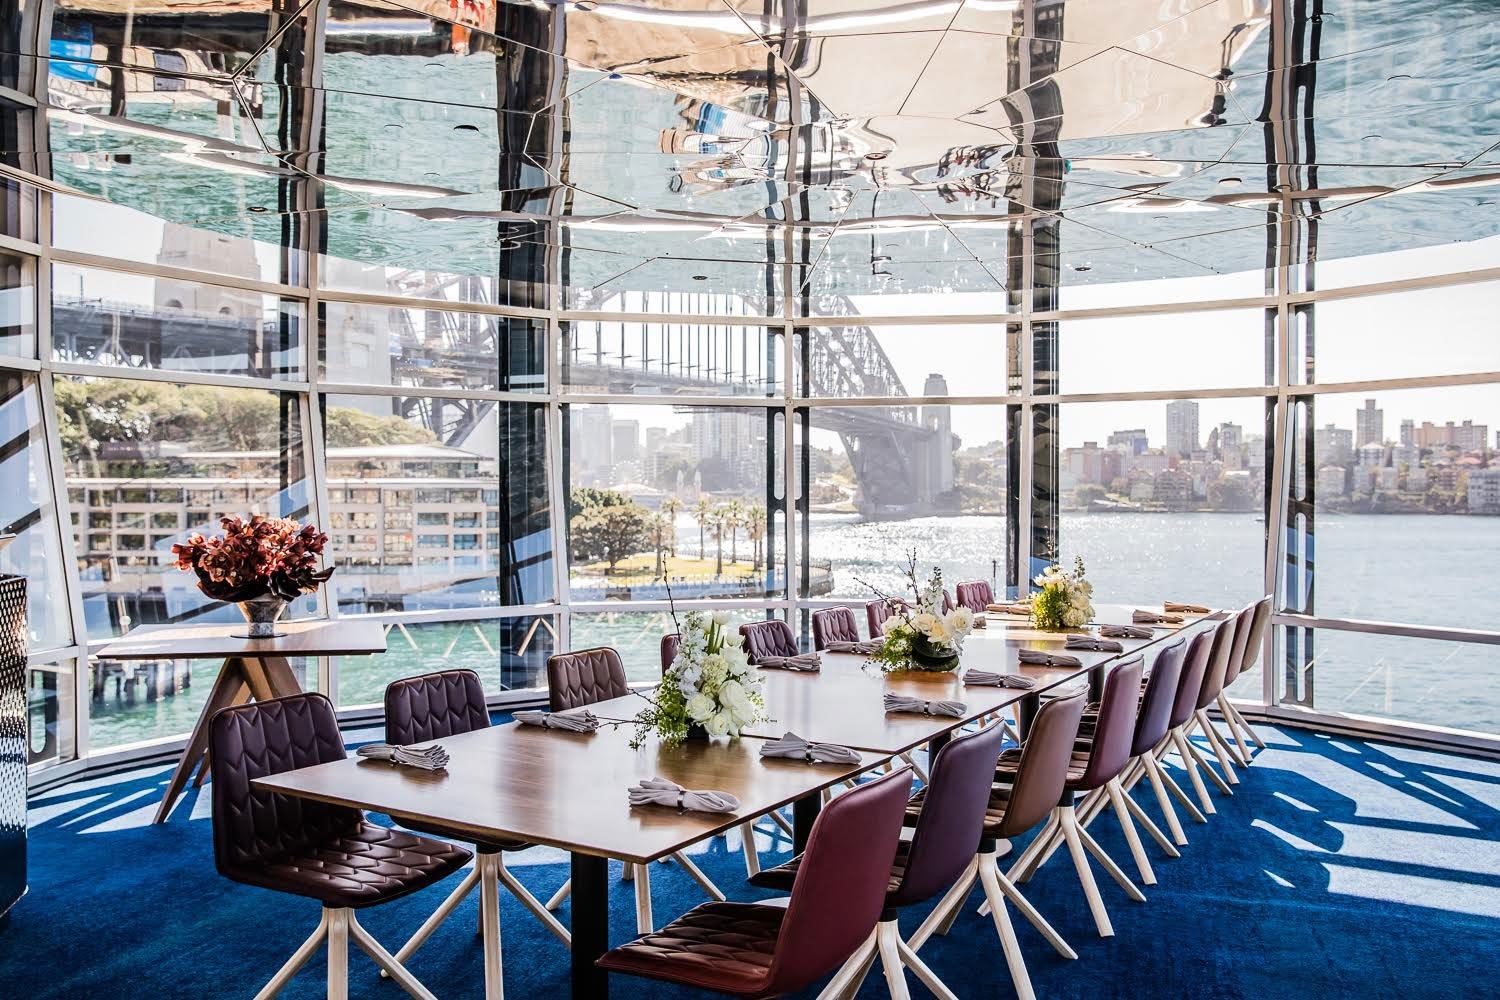 The Dining Room Sydney / Transitional Dining Room Transitional Dining Room Sydney Houzz / The dining room is relaxing, the food is a delight to the palate and the wine menu selected to compliment your food.